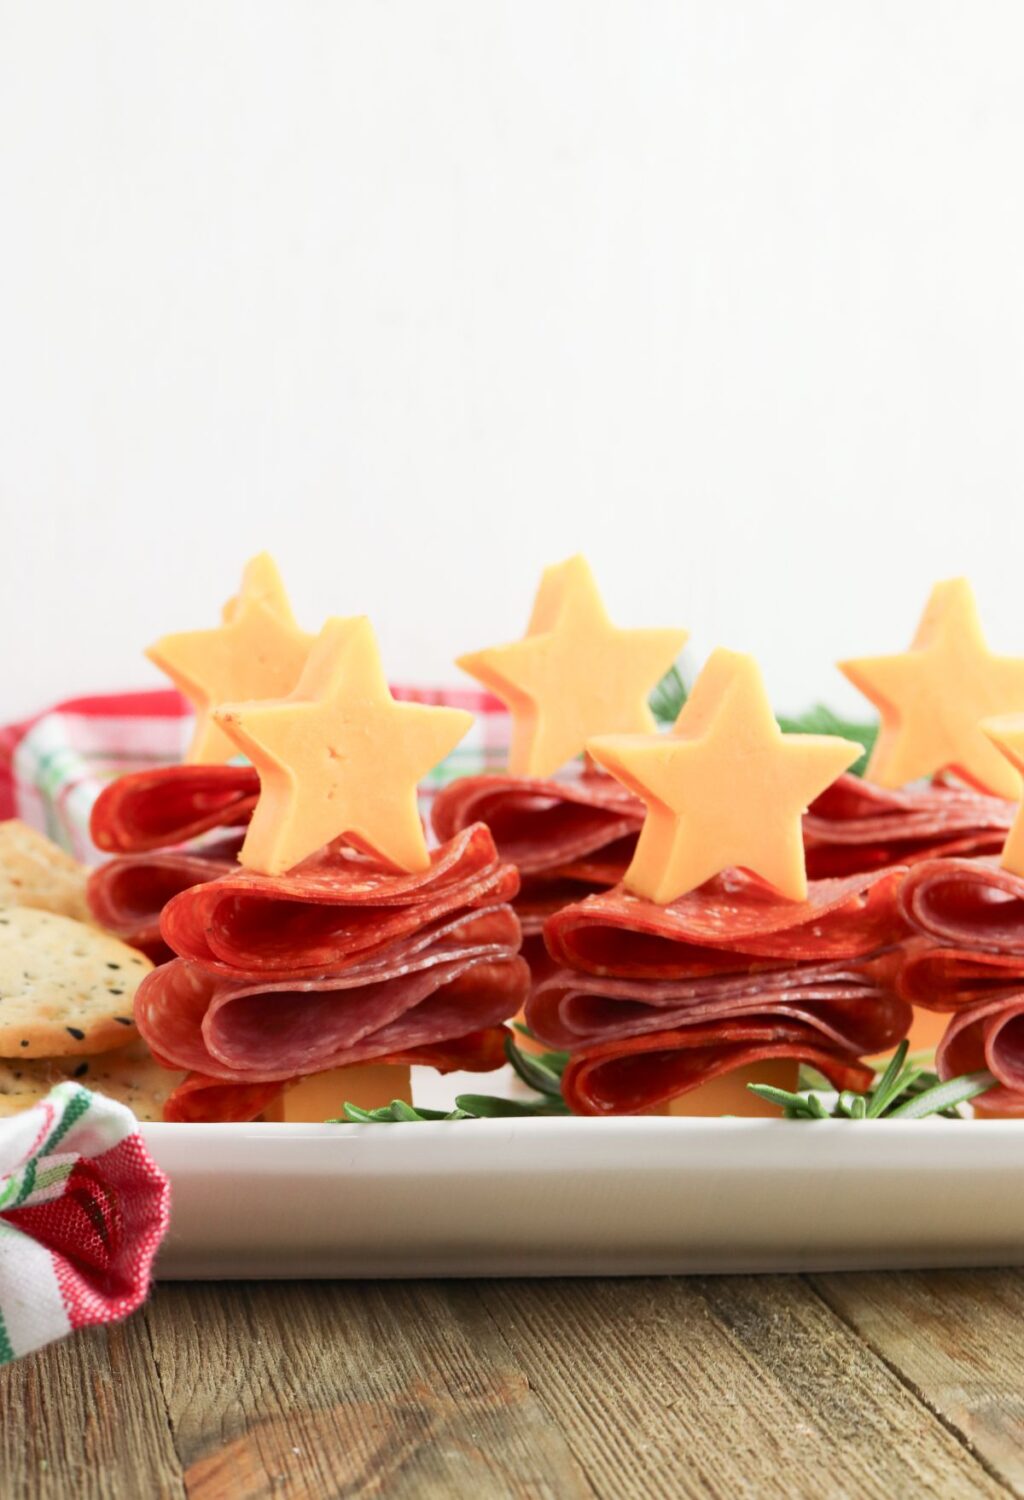 A plate with cheese and crackers in the shape of a christmas tree.